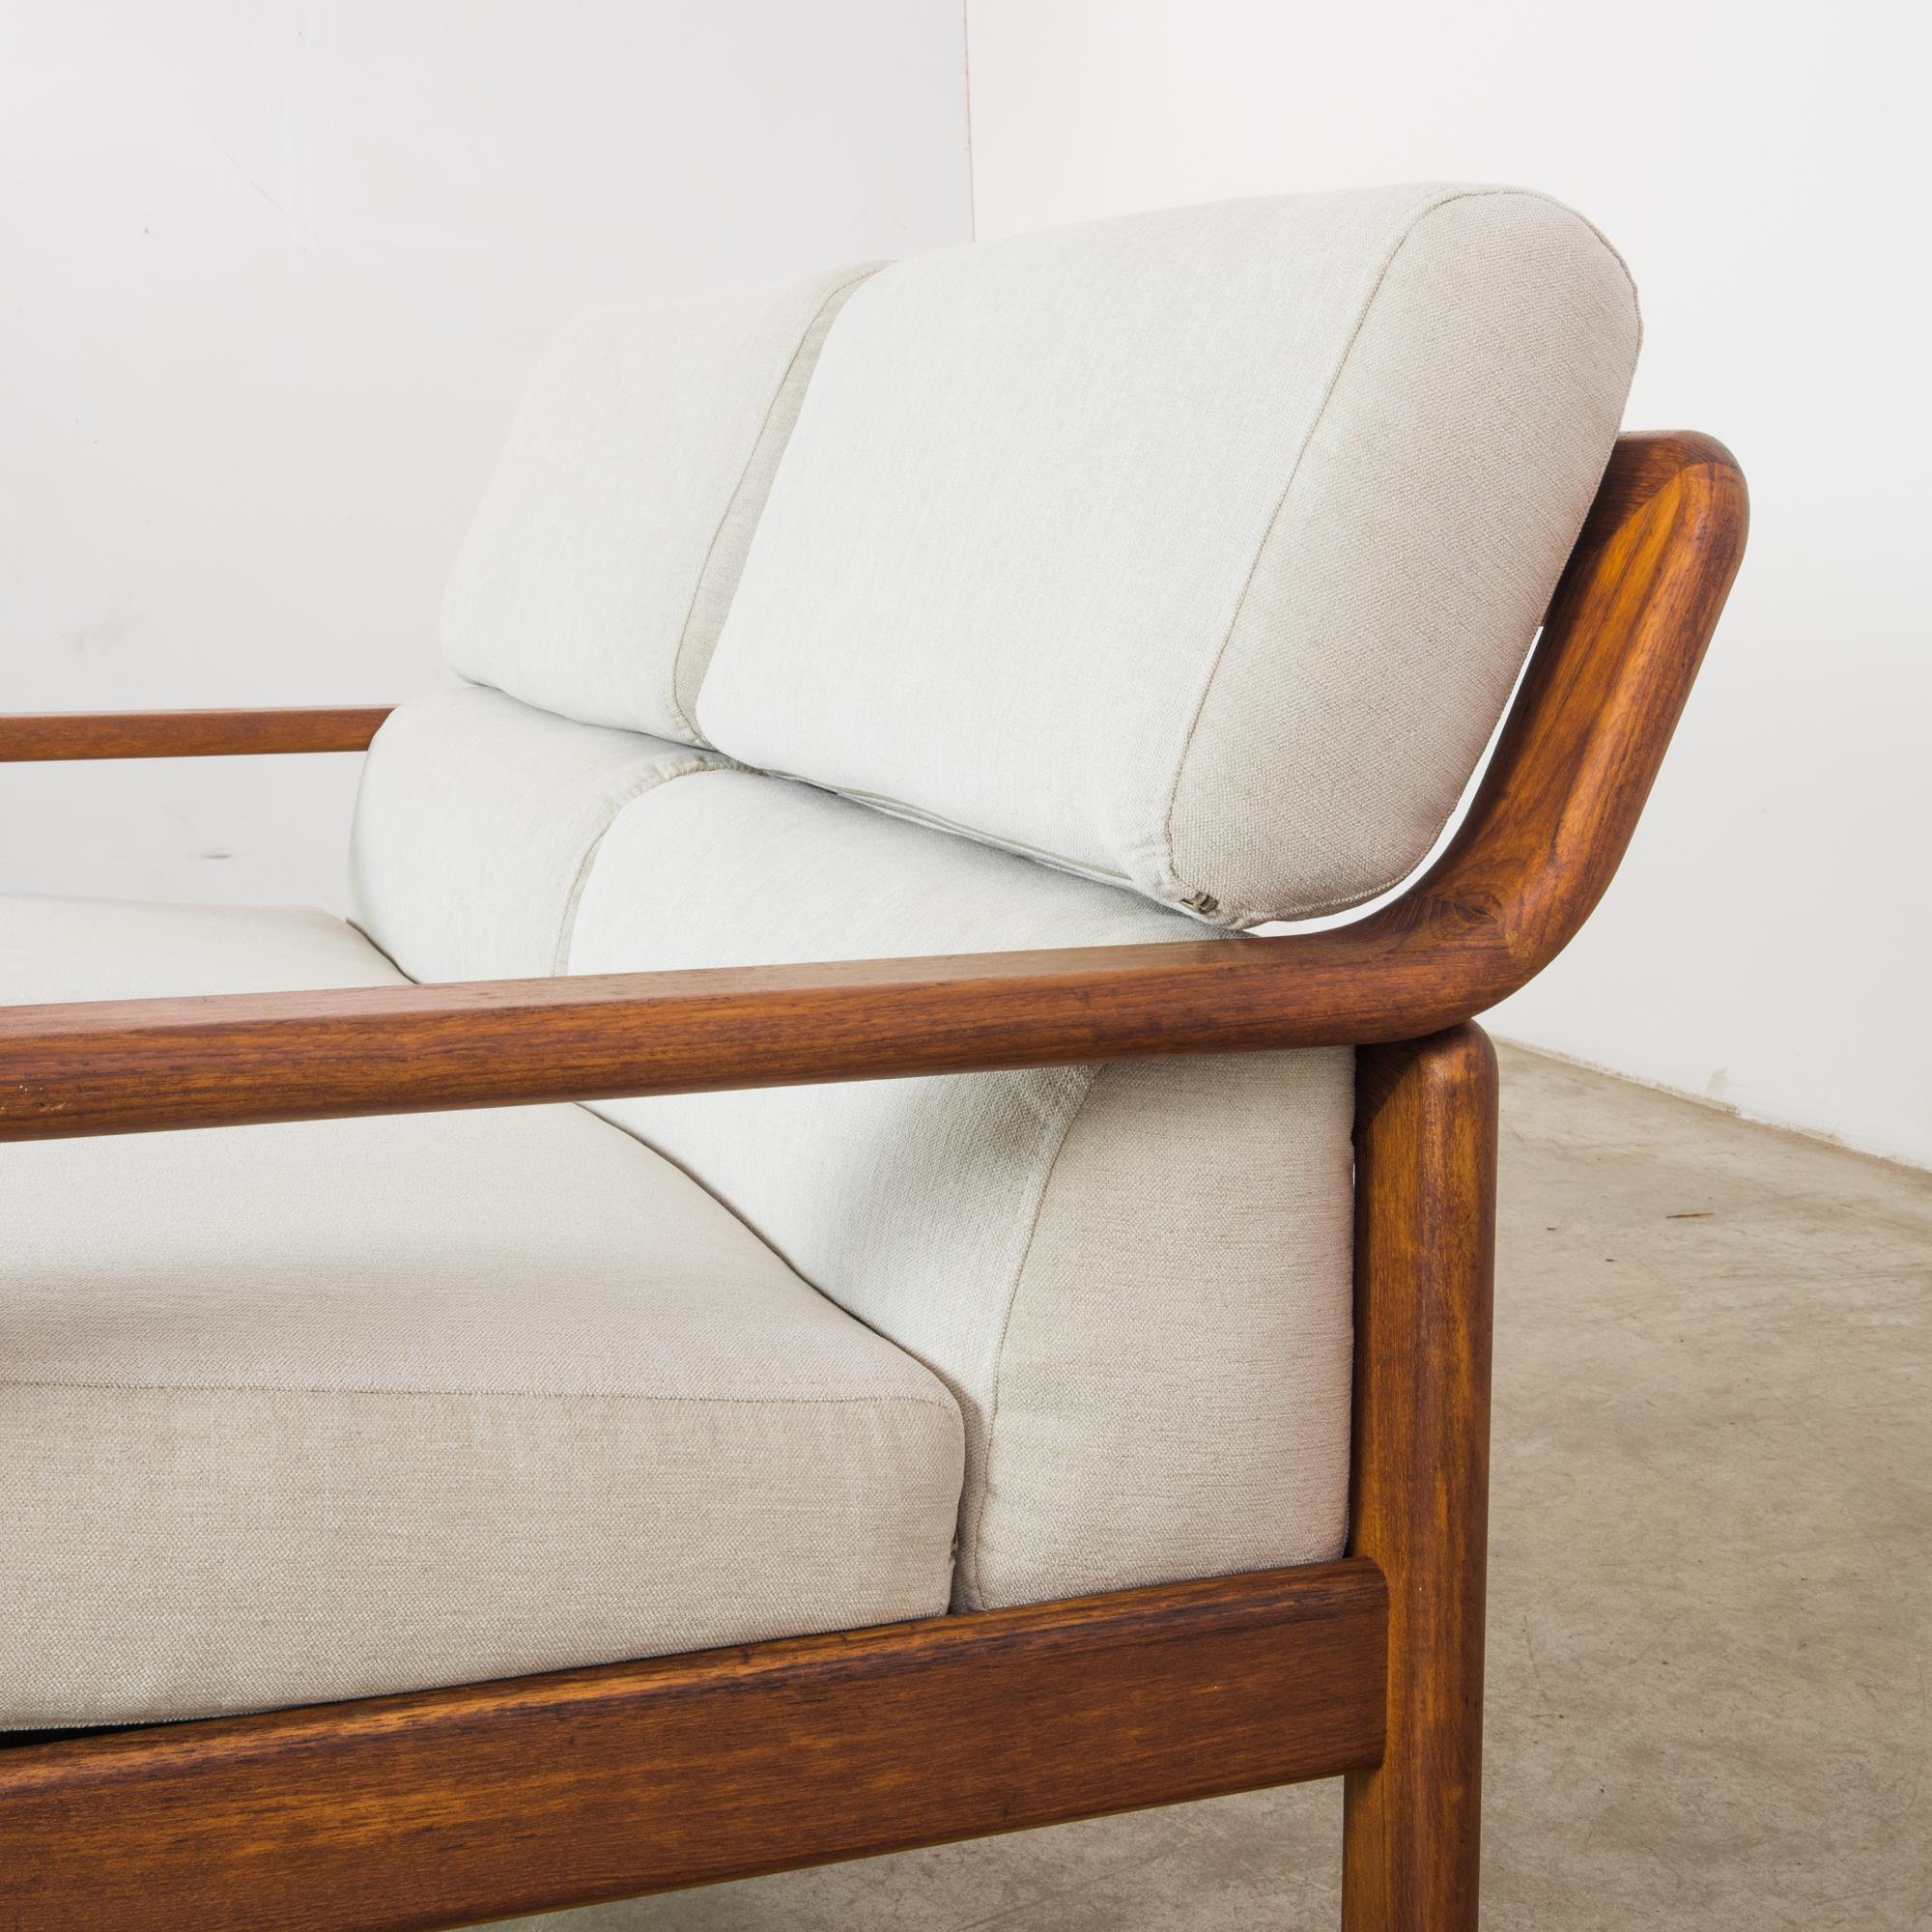 1960s Danish Teak Sofa with Upholstered Seat and Back 4